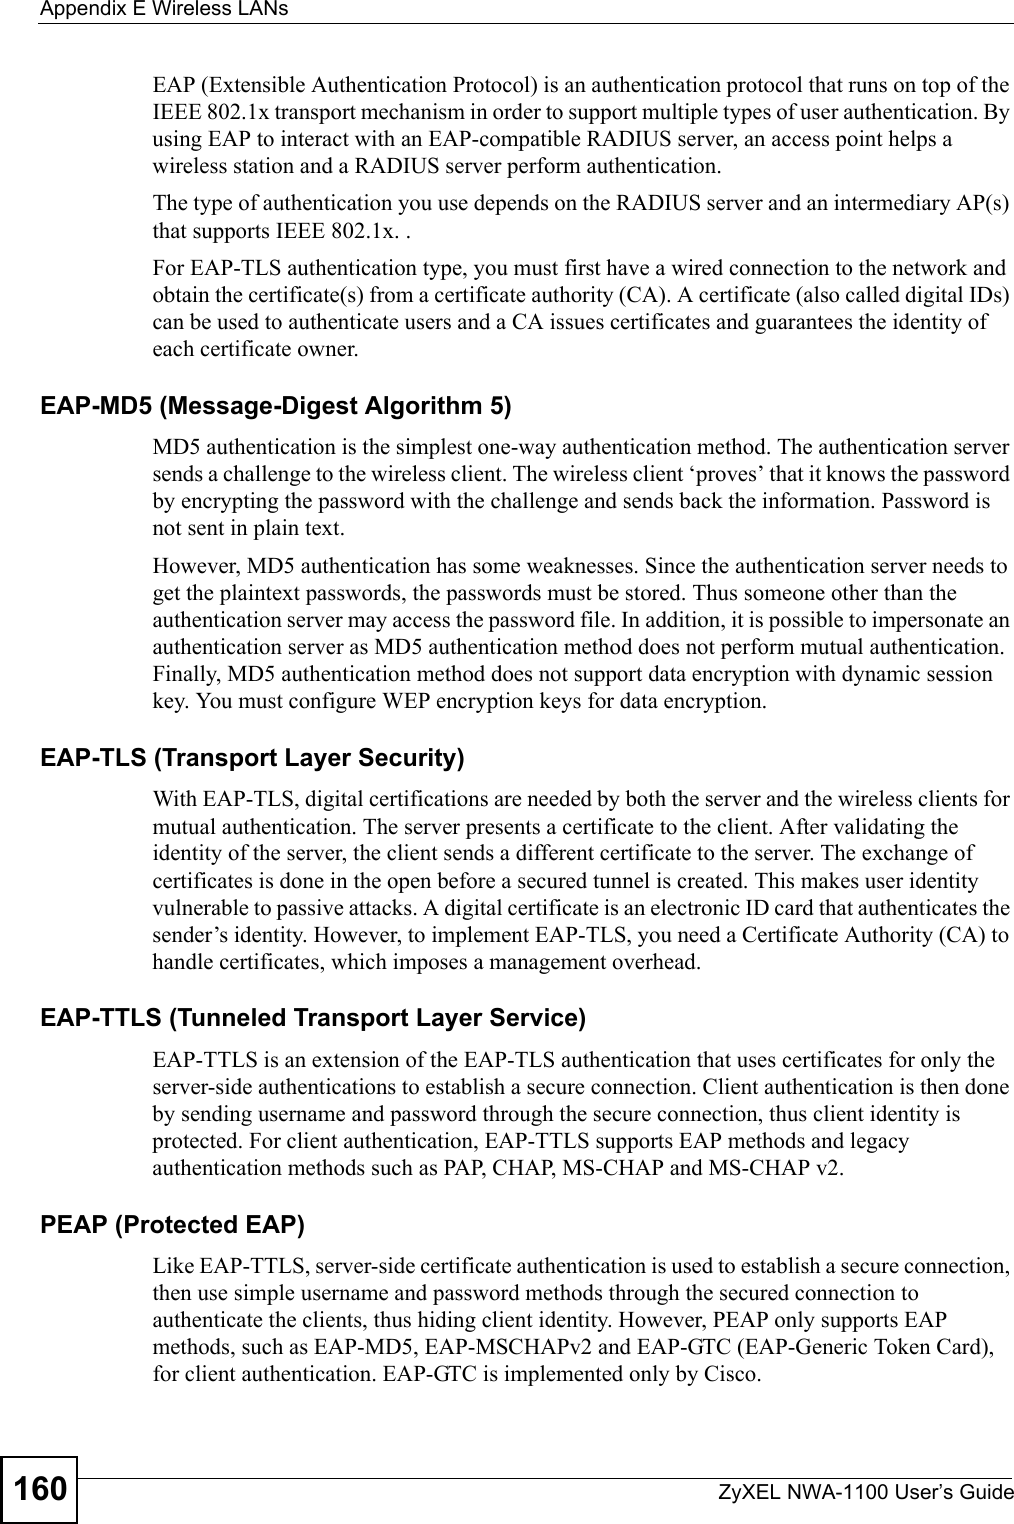 Appendix E Wireless LANsZyXEL NWA-1100 User’s Guide160EAP (Extensible Authentication Protocol) is an authentication protocol that runs on top of the IEEE 802.1x transport mechanism in order to support multiple types of user authentication. By using EAP to interact with an EAP-compatible RADIUS server, an access point helps a wireless station and a RADIUS server perform authentication. The type of authentication you use depends on the RADIUS server and an intermediary AP(s) that supports IEEE 802.1x. .For EAP-TLS authentication type, you must first have a wired connection to the network and obtain the certificate(s) from a certificate authority (CA). A certificate (also called digital IDs) can be used to authenticate users and a CA issues certificates and guarantees the identity of each certificate owner.EAP-MD5 (Message-Digest Algorithm 5)MD5 authentication is the simplest one-way authentication method. The authentication server sends a challenge to the wireless client. The wireless client ‘proves’ that it knows the password by encrypting the password with the challenge and sends back the information. Password is not sent in plain text. However, MD5 authentication has some weaknesses. Since the authentication server needs to get the plaintext passwords, the passwords must be stored. Thus someone other than the authentication server may access the password file. In addition, it is possible to impersonate an authentication server as MD5 authentication method does not perform mutual authentication. Finally, MD5 authentication method does not support data encryption with dynamic session key. You must configure WEP encryption keys for data encryption. EAP-TLS (Transport Layer Security)With EAP-TLS, digital certifications are needed by both the server and the wireless clients for mutual authentication. The server presents a certificate to the client. After validating the identity of the server, the client sends a different certificate to the server. The exchange of certificates is done in the open before a secured tunnel is created. This makes user identity vulnerable to passive attacks. A digital certificate is an electronic ID card that authenticates the sender’s identity. However, to implement EAP-TLS, you need a Certificate Authority (CA) to handle certificates, which imposes a management overhead. EAP-TTLS (Tunneled Transport Layer Service) EAP-TTLS is an extension of the EAP-TLS authentication that uses certificates for only the server-side authentications to establish a secure connection. Client authentication is then done by sending username and password through the secure connection, thus client identity is protected. For client authentication, EAP-TTLS supports EAP methods and legacy authentication methods such as PAP, CHAP, MS-CHAP and MS-CHAP v2. PEAP (Protected EAP)   Like EAP-TTLS, server-side certificate authentication is used to establish a secure connection, then use simple username and password methods through the secured connection to authenticate the clients, thus hiding client identity. However, PEAP only supports EAP methods, such as EAP-MD5, EAP-MSCHAPv2 and EAP-GTC (EAP-Generic Token Card), for client authentication. EAP-GTC is implemented only by Cisco.